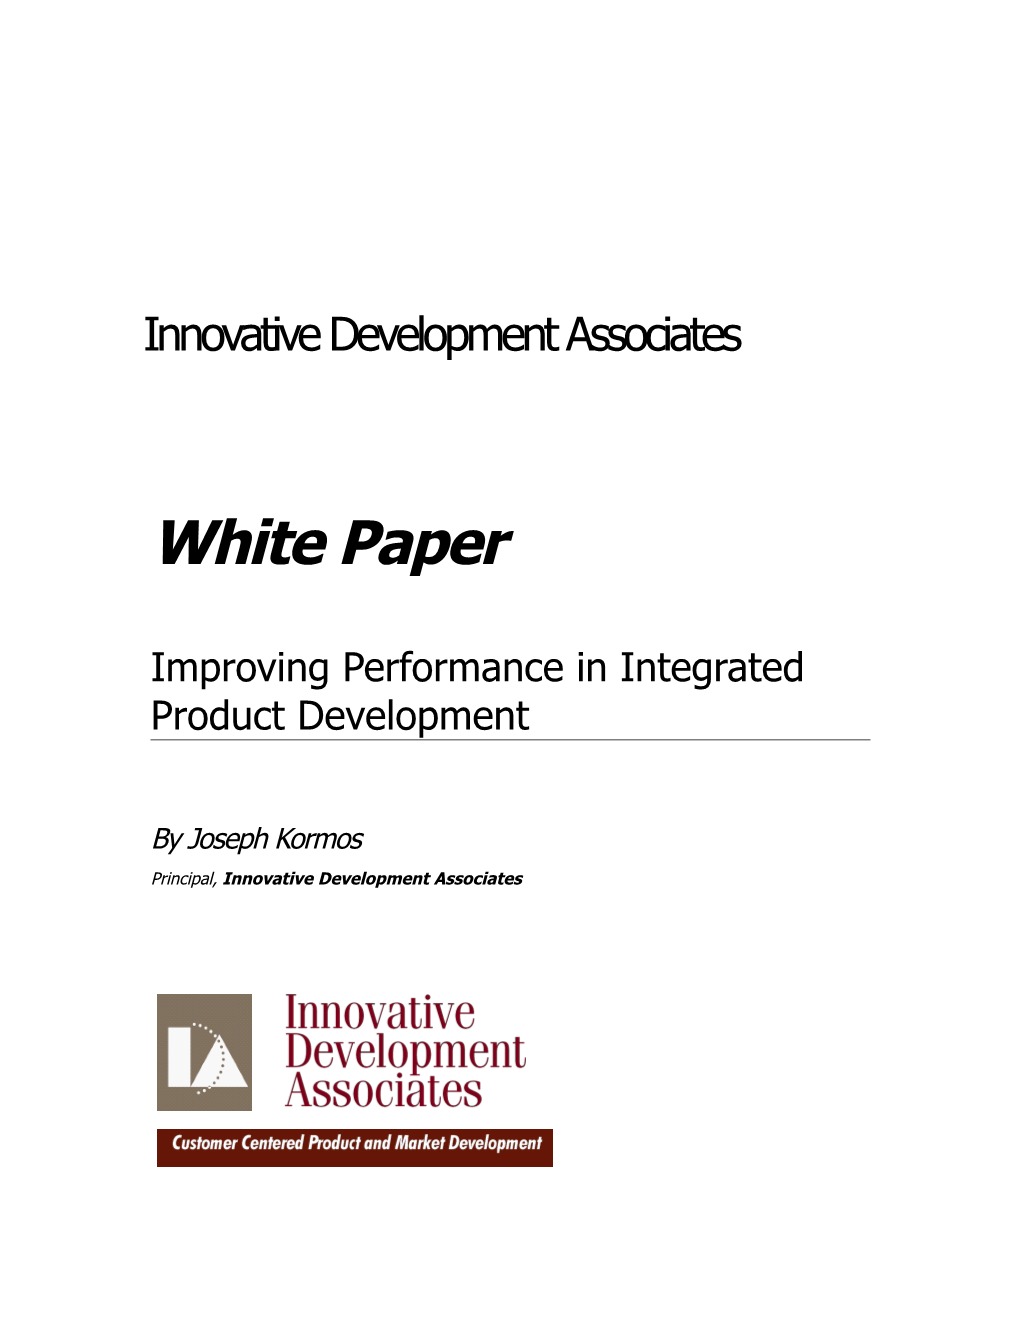 Improving Performance in Integrated Product Development